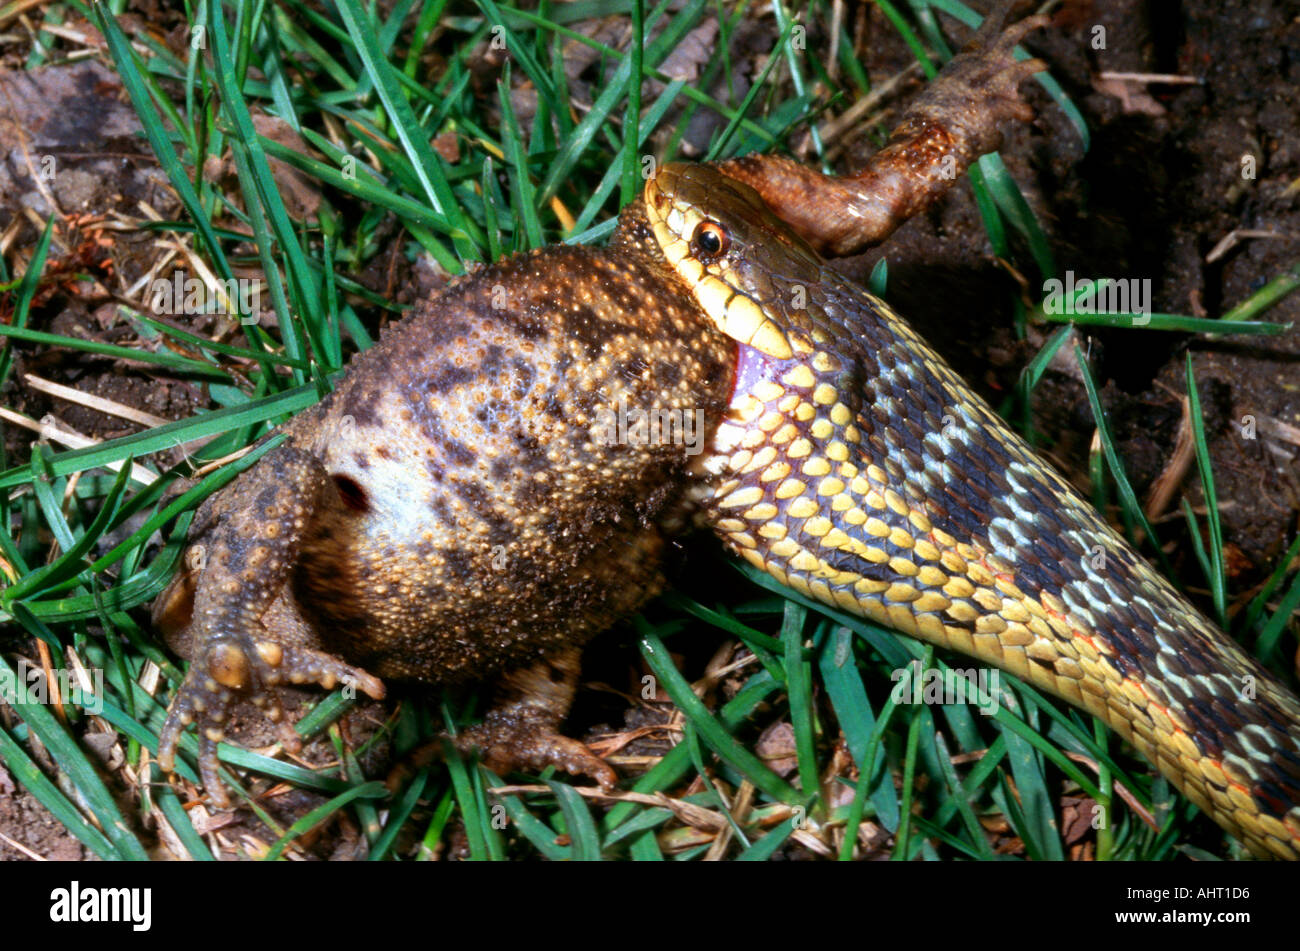 Common garden snake in the process of eating a ground toad Stock Photo